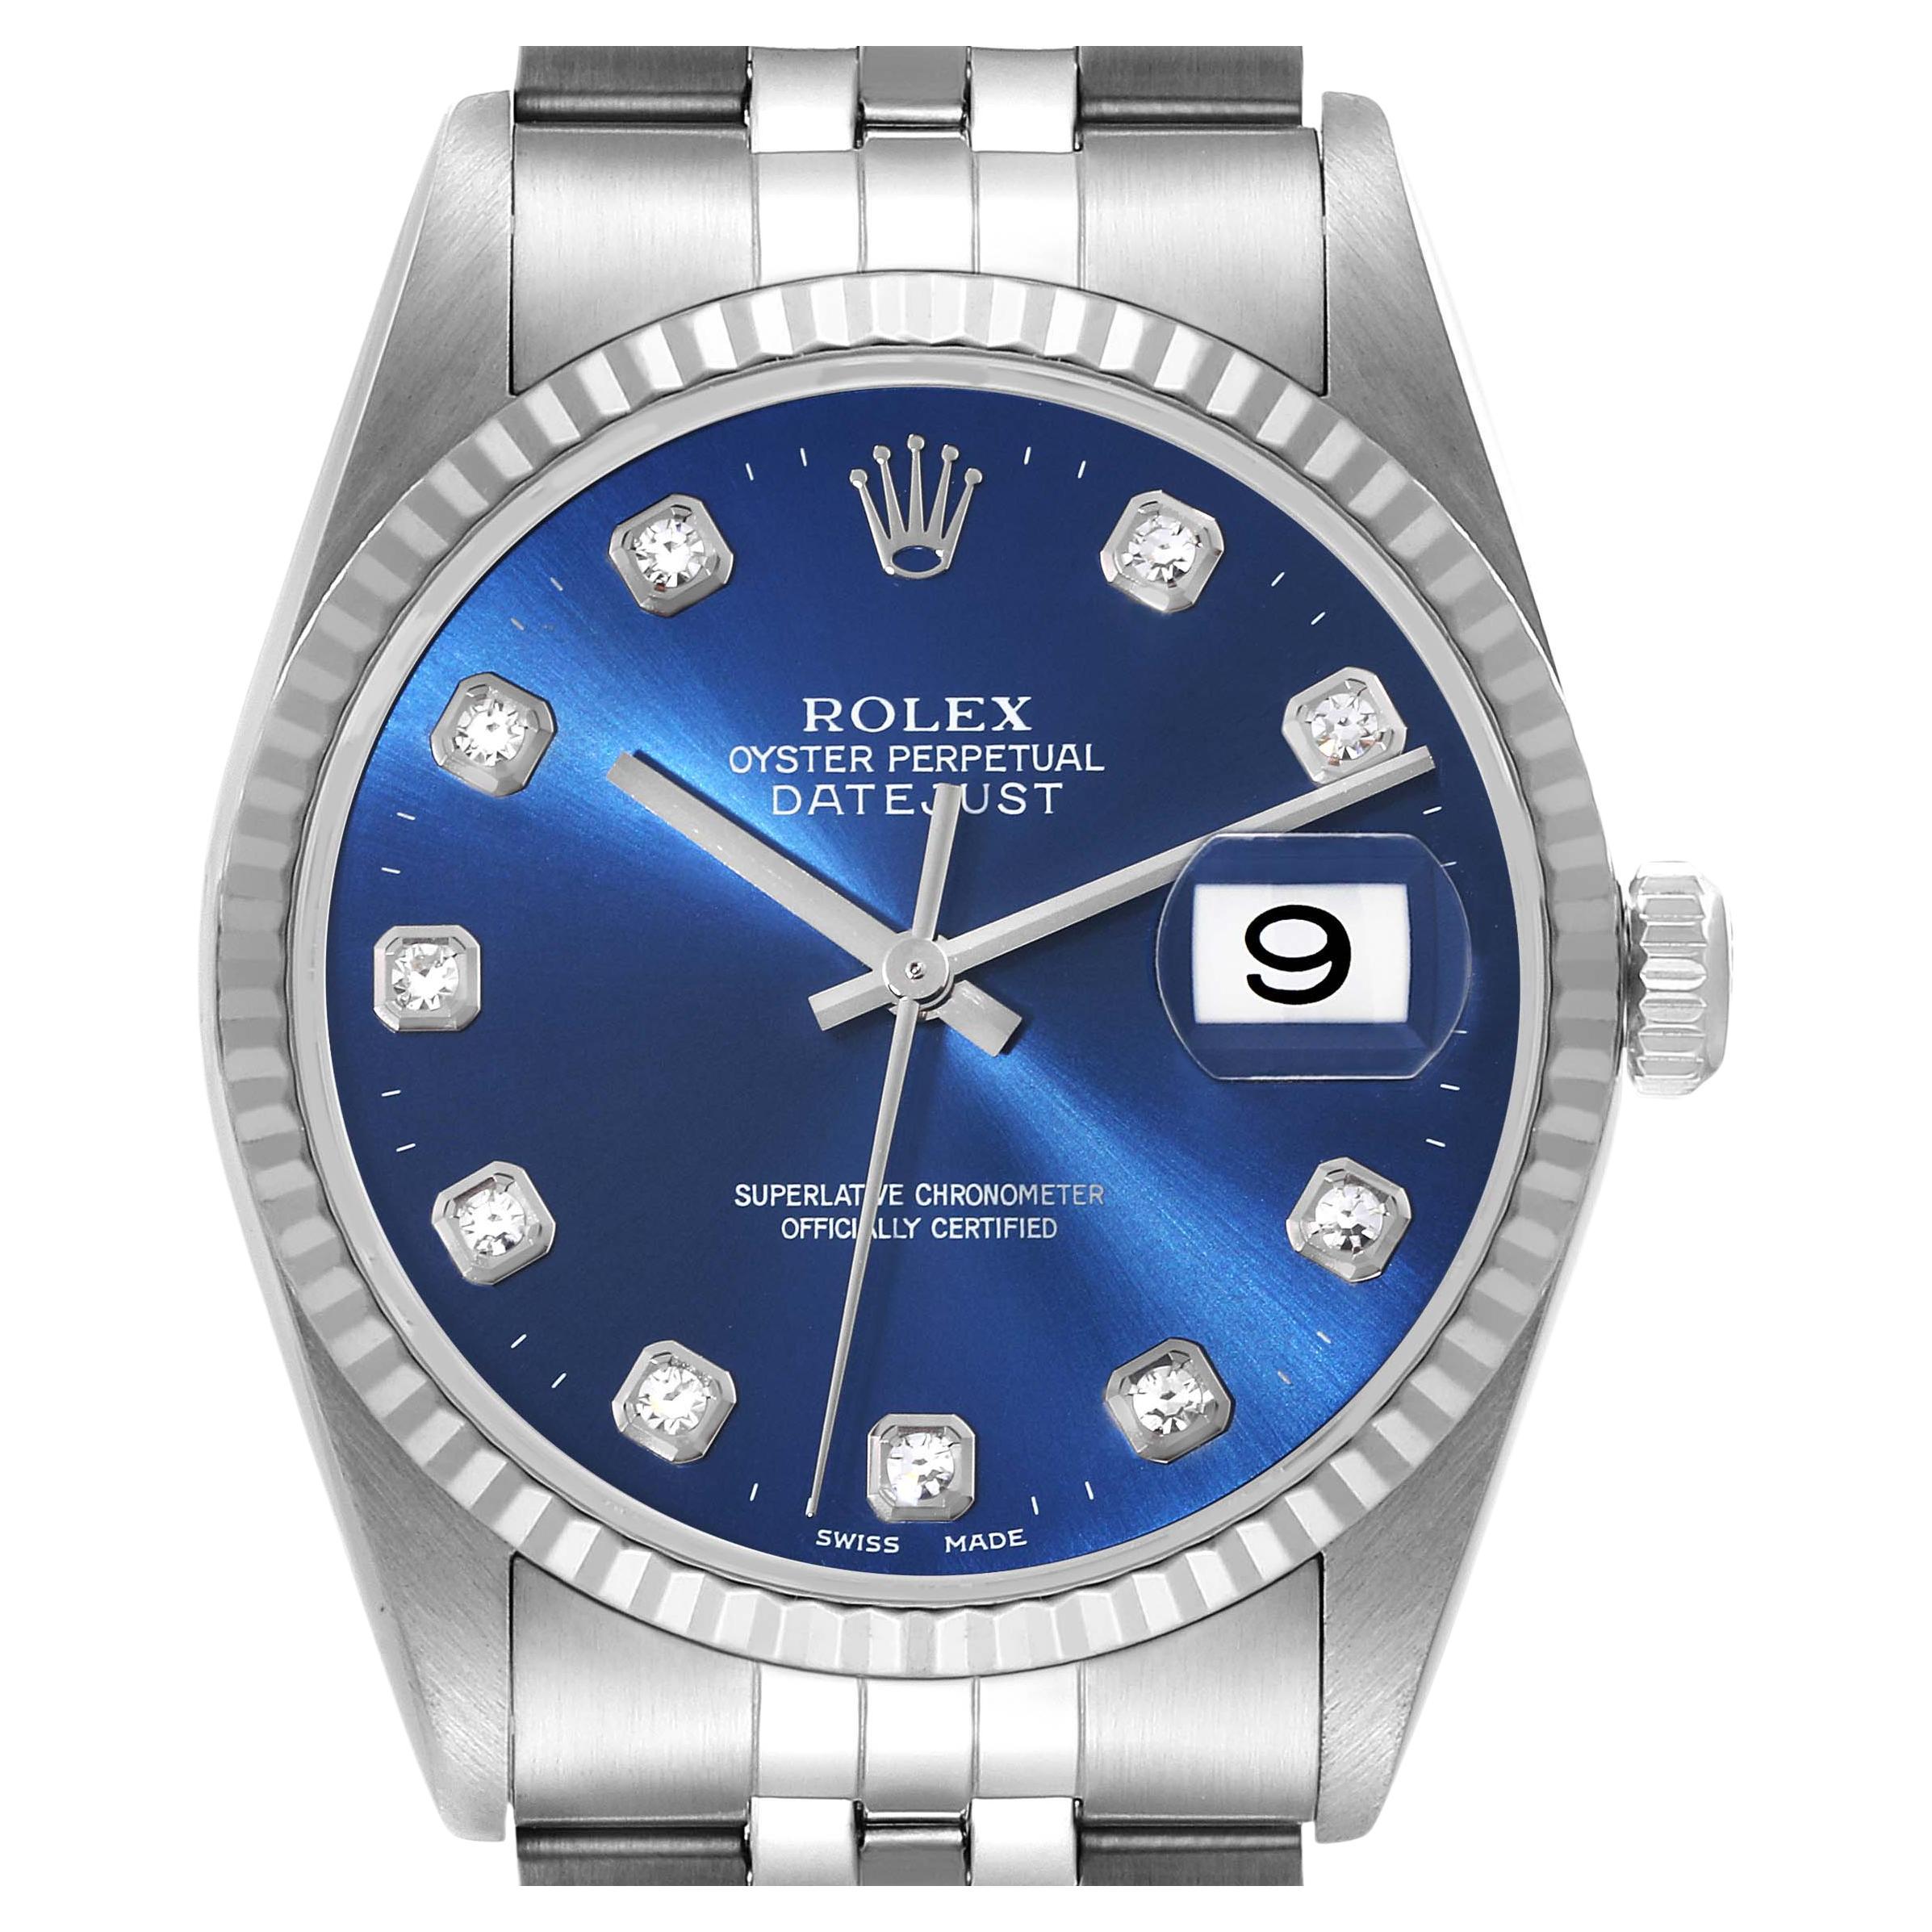 Rolex Datejust Steel White Gold Blue Diamond Dial Mens Watch 16234 Box Papers